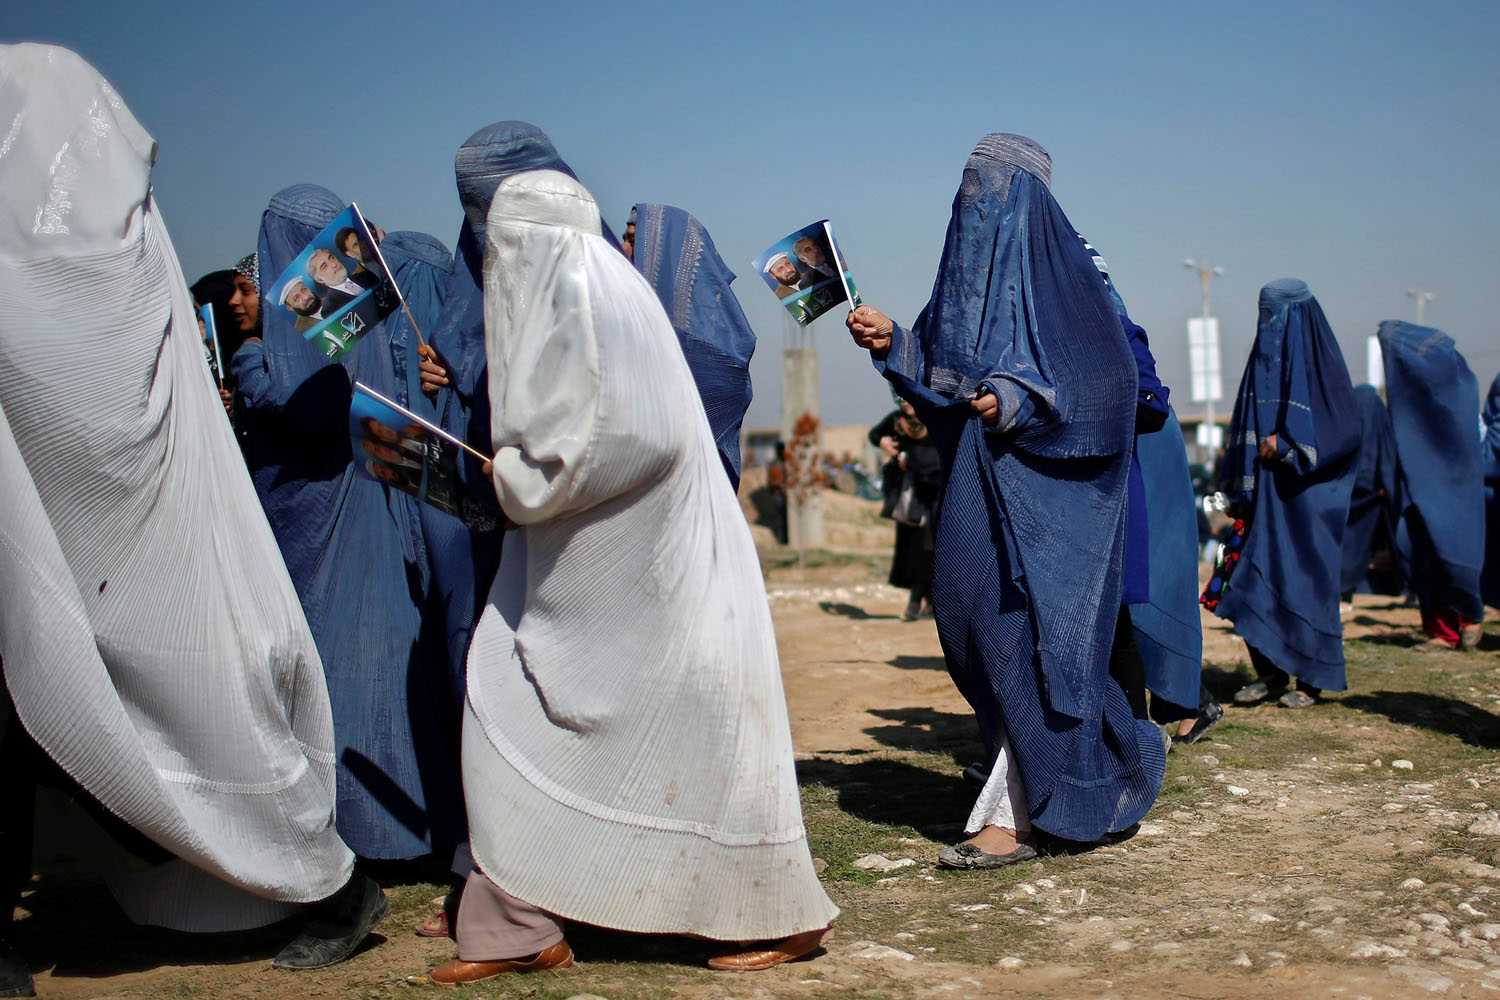 Mar. 28, 2014. Supporters of Afghan presidential candidate Abdullah Abdullah arrive to attend an election rally in Mazar-I-Shariff, northern Afghanistan.